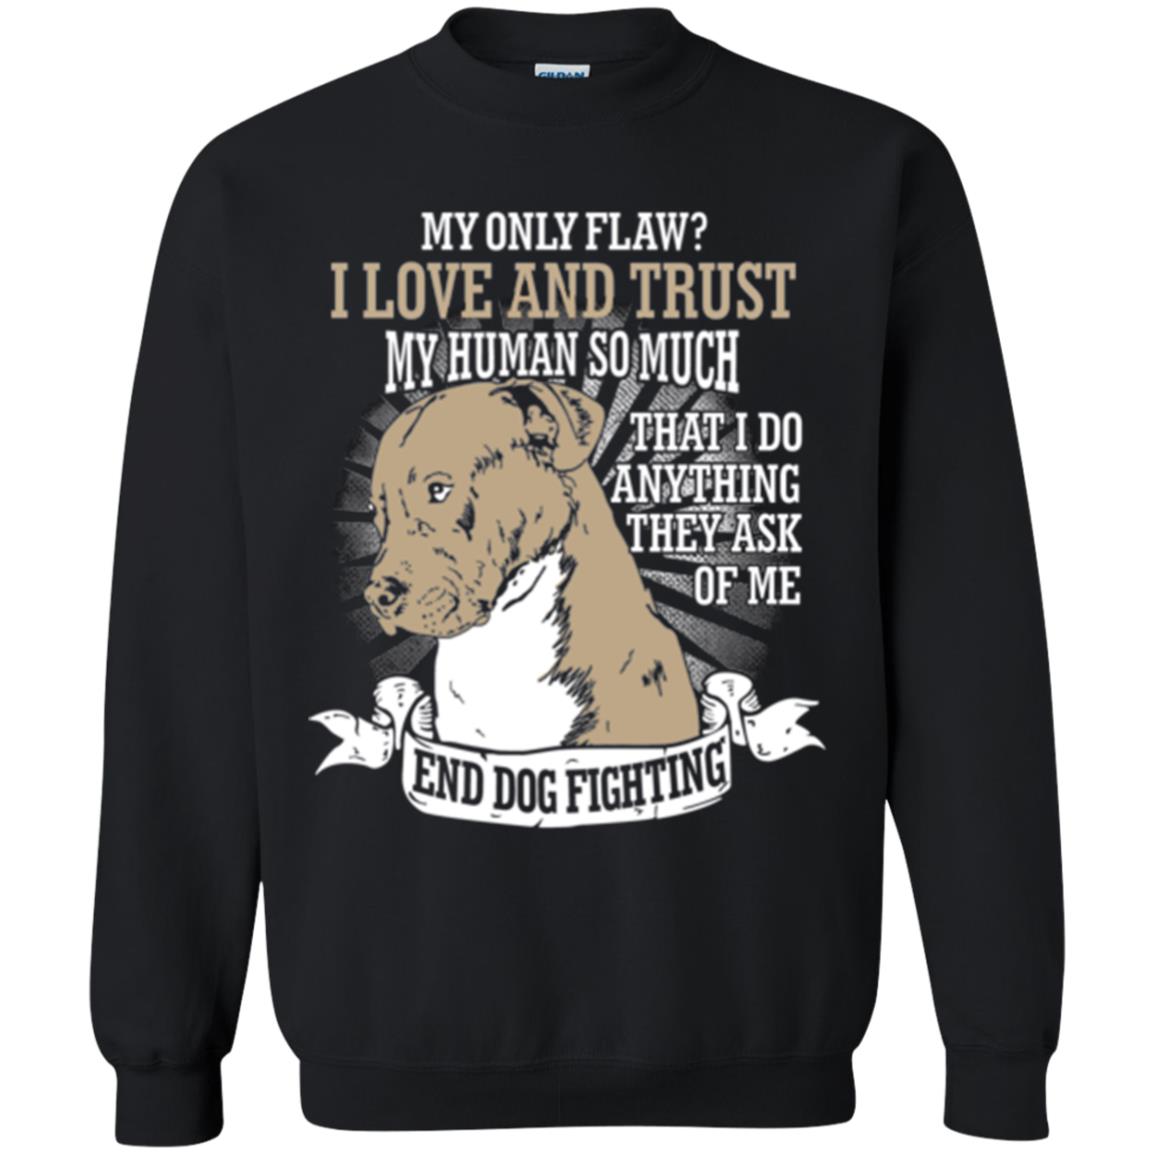 I Do Anything They Ask Of Me End Dog Fighting Shirt